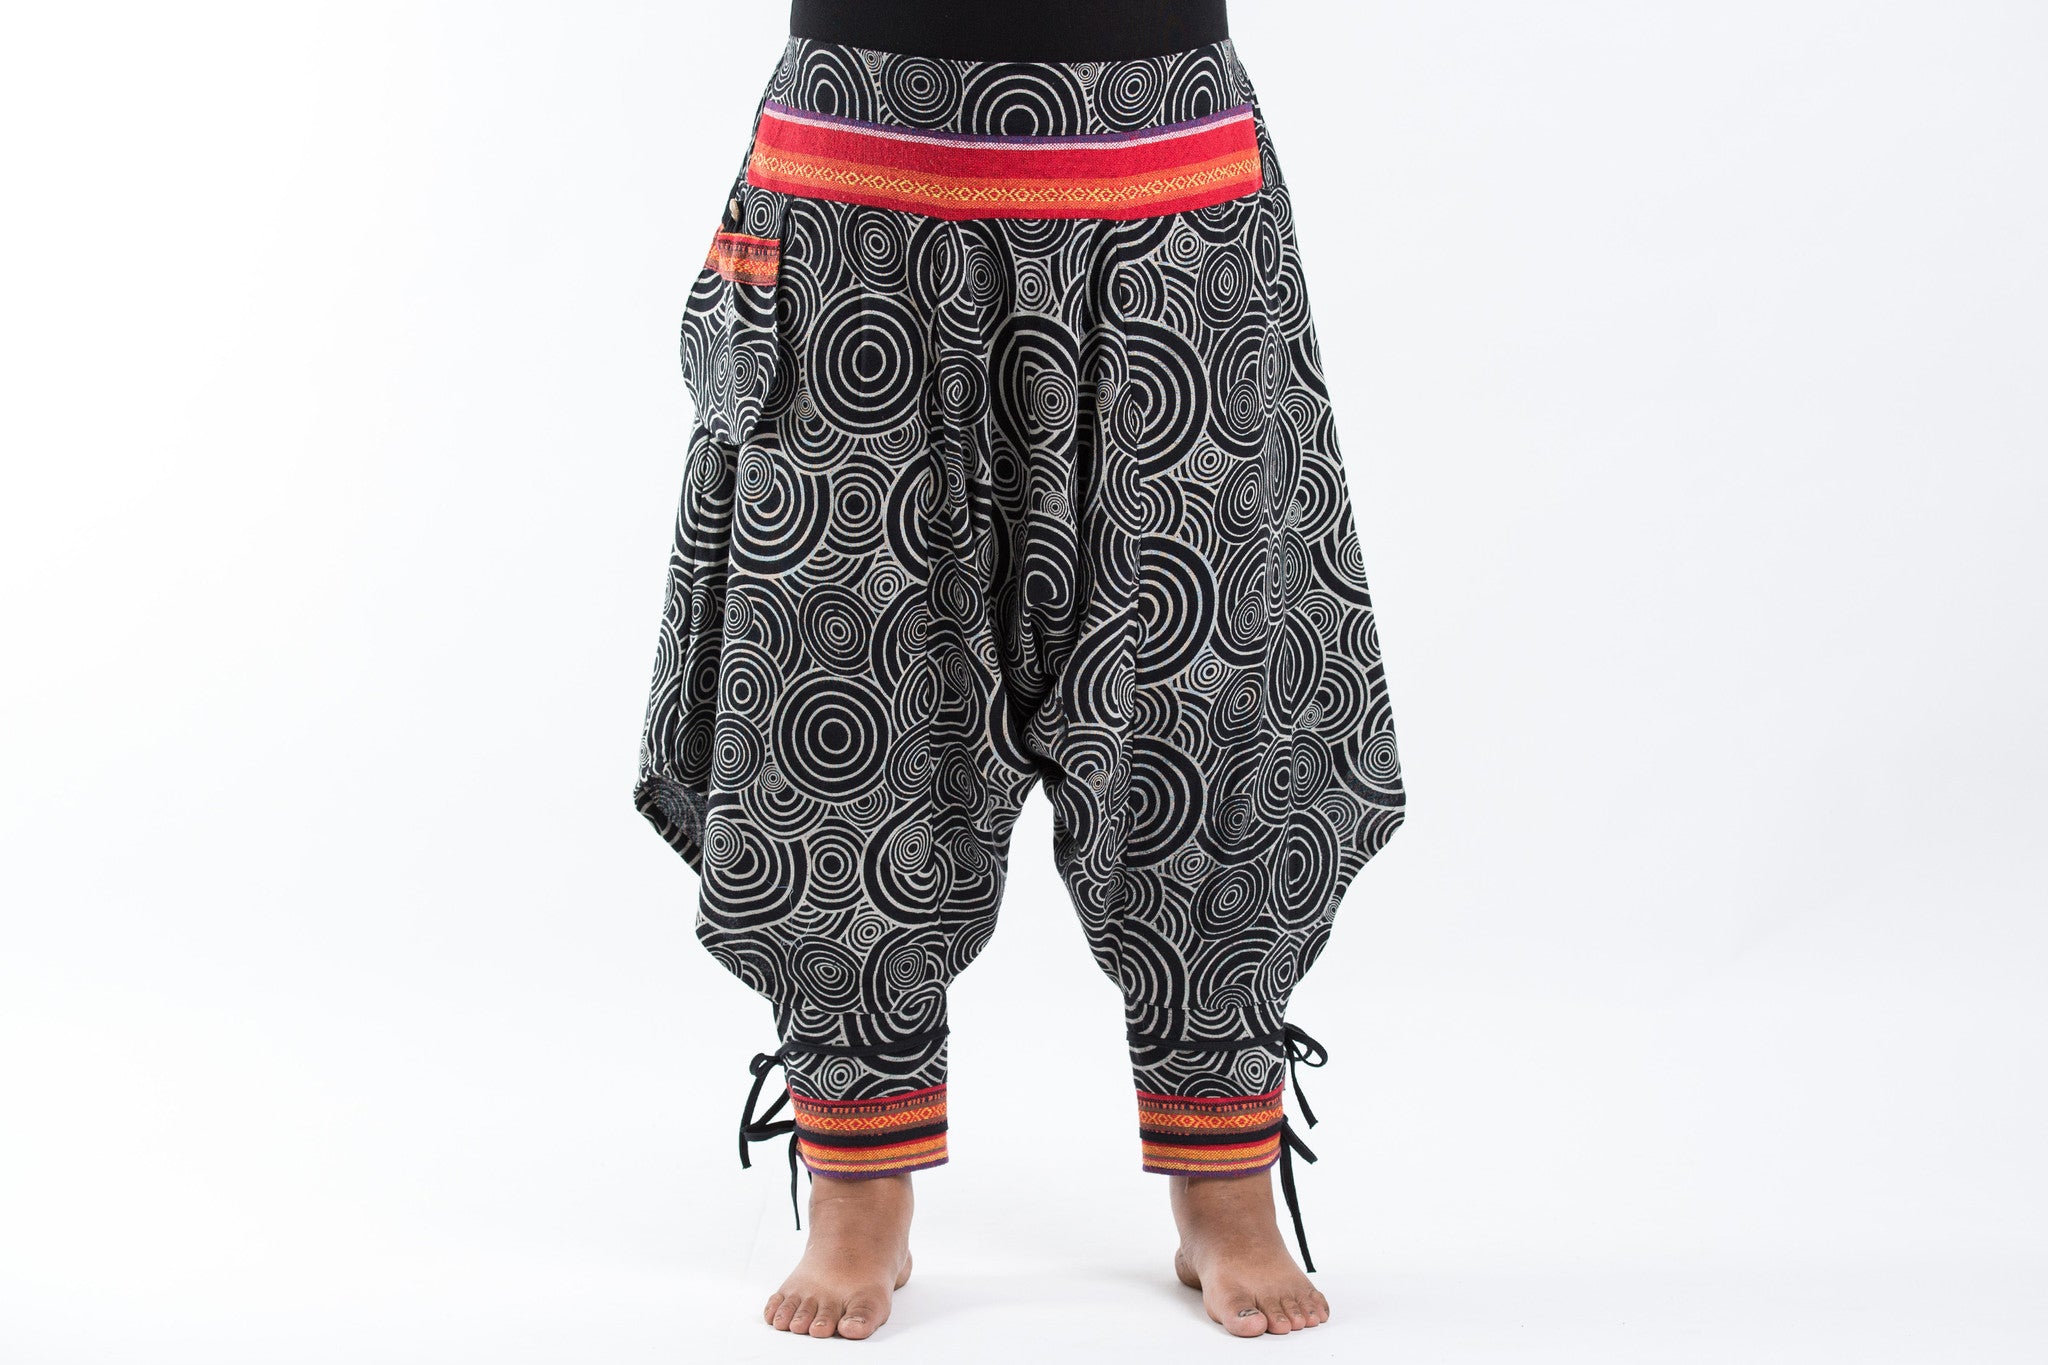 Plus Size Swirls Prints Thai Hill Tribe Fabric Women Harem Pants with Ankle Straps in Black